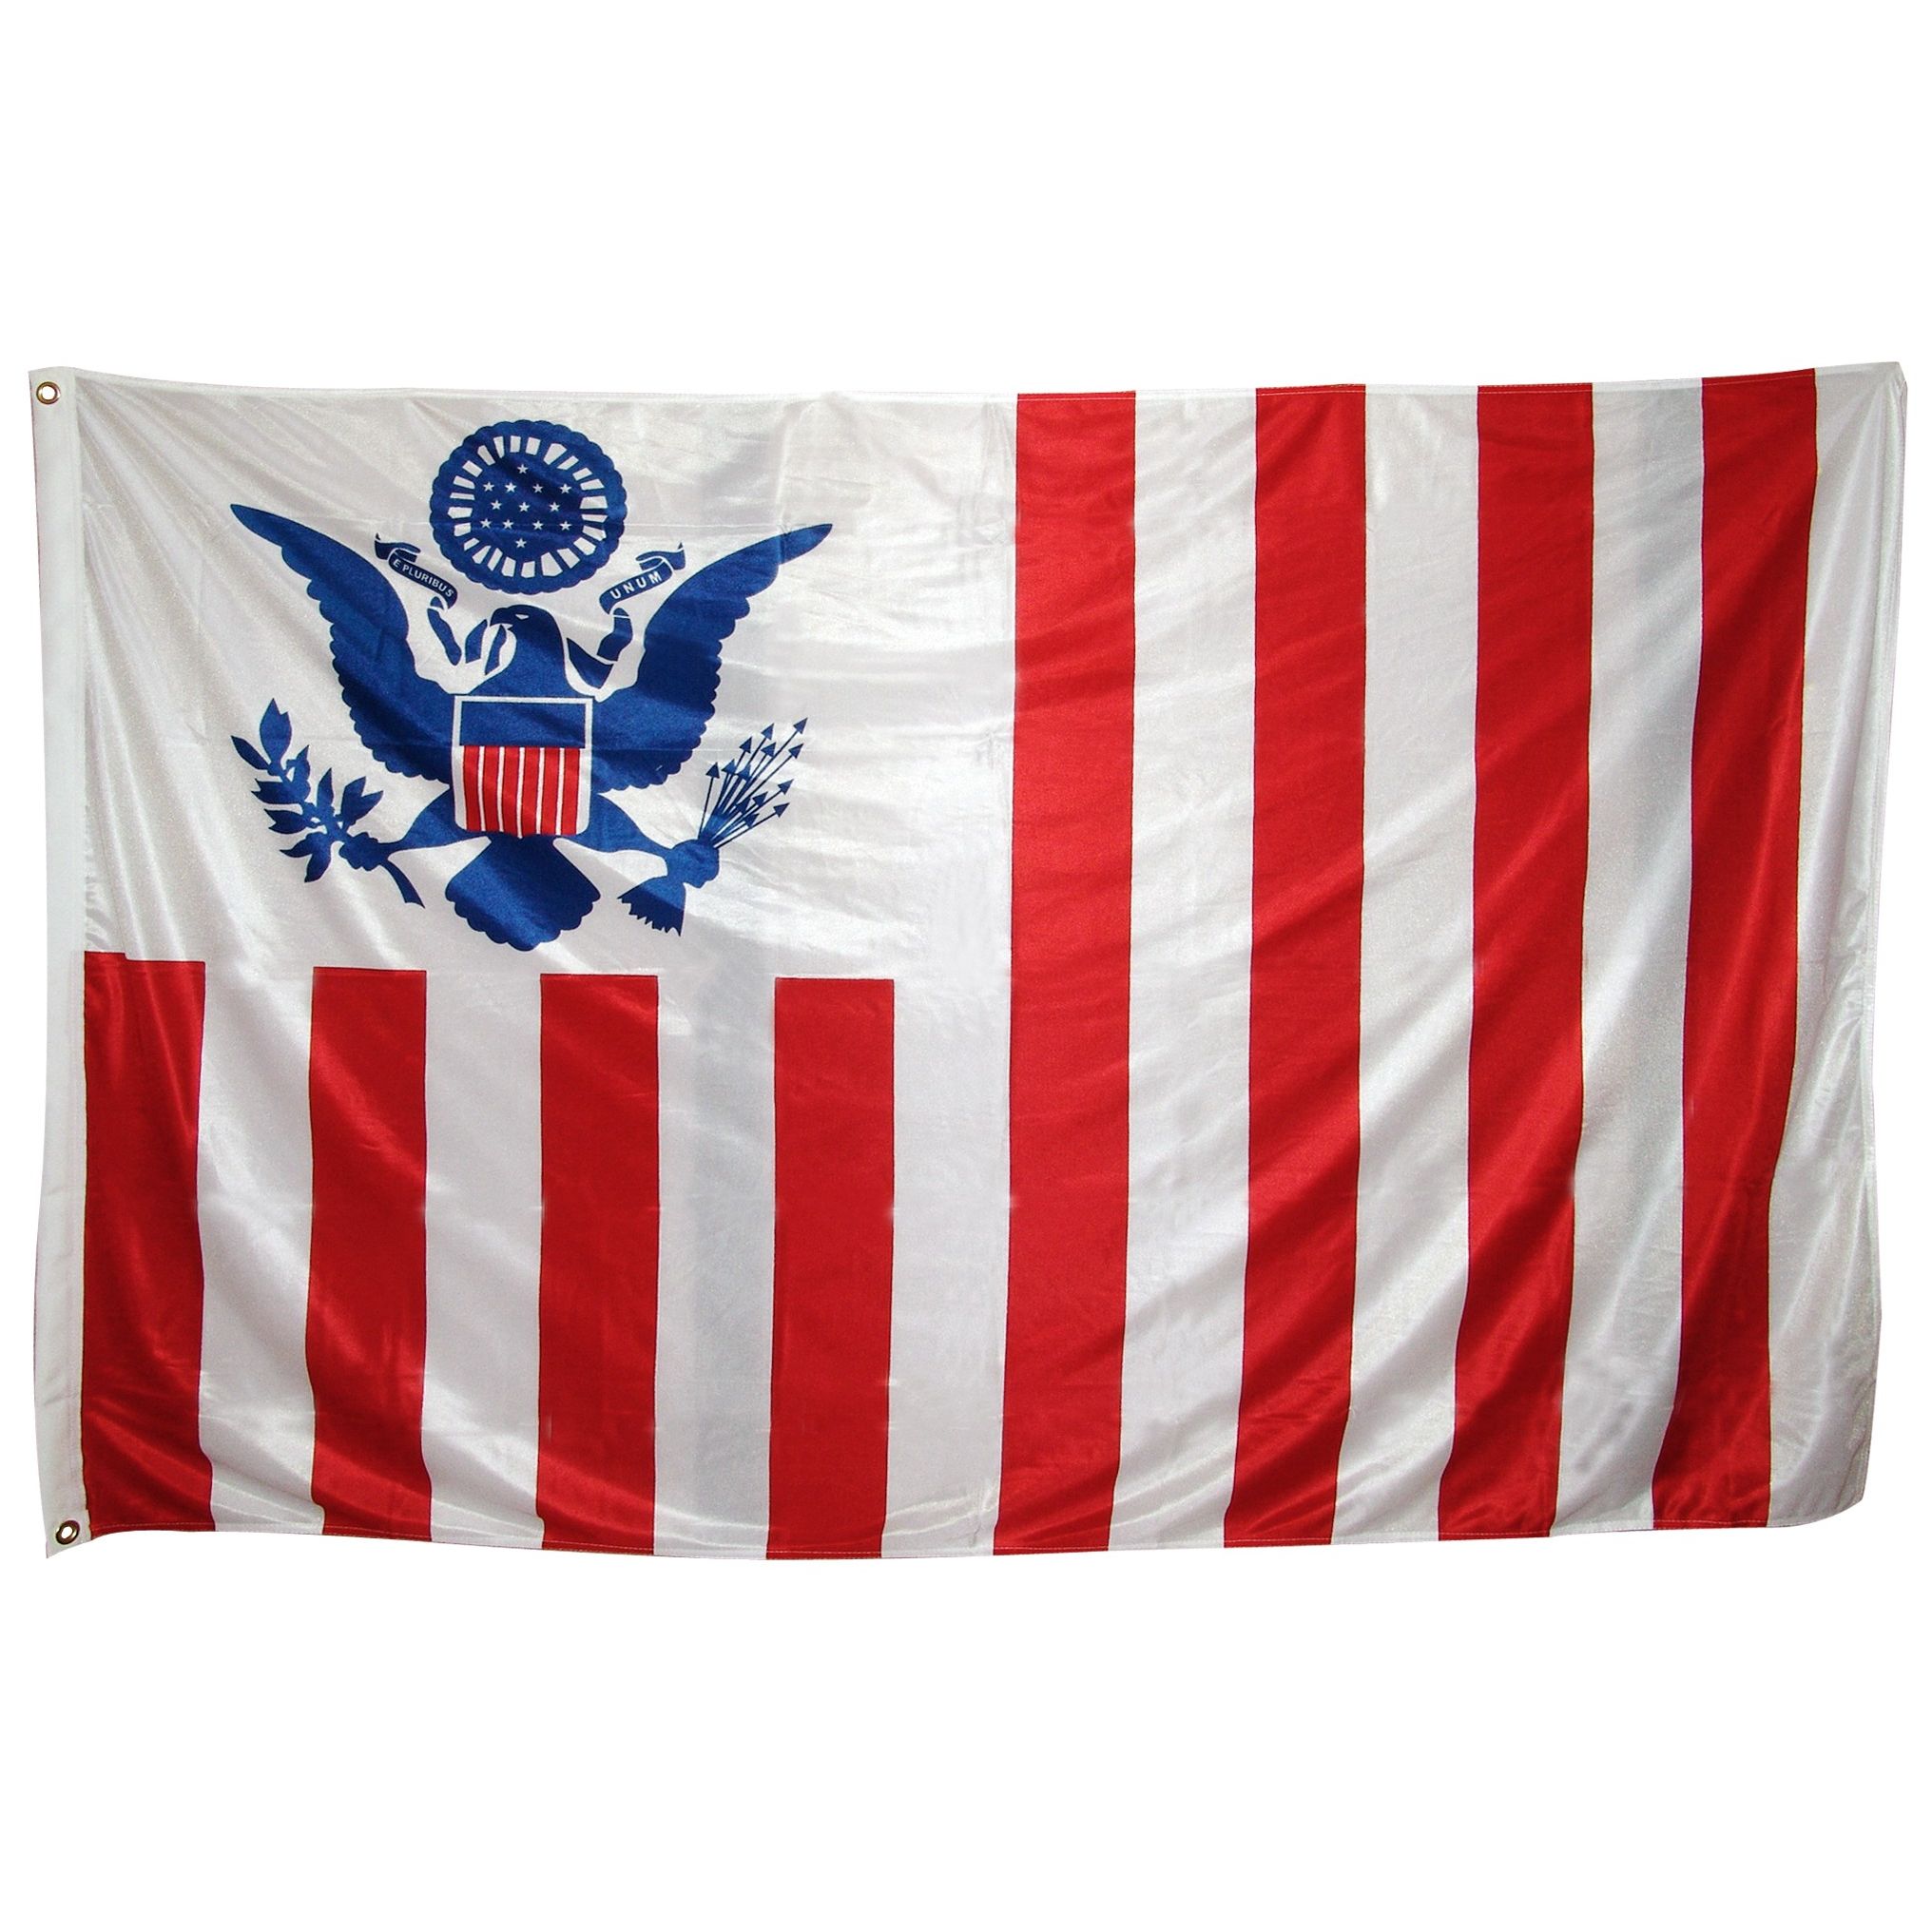 Wife On Board Boat Flag Outdoor 12×18″ Nylon Printed Made in USA